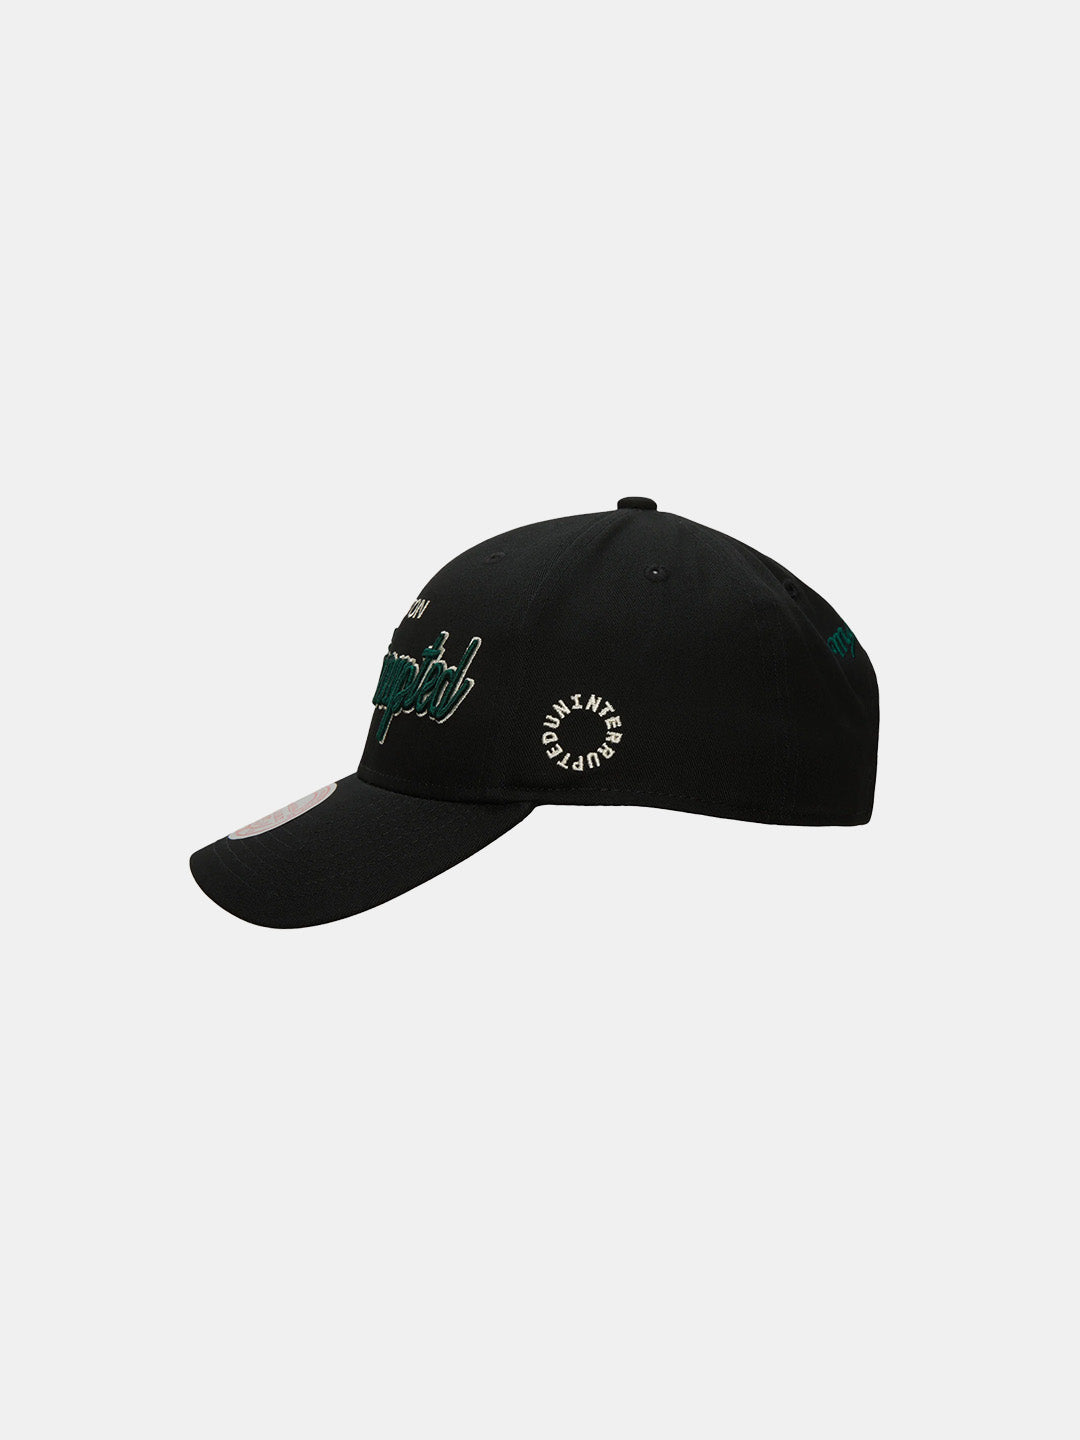 side view of the hat and the uninterrupted emblem